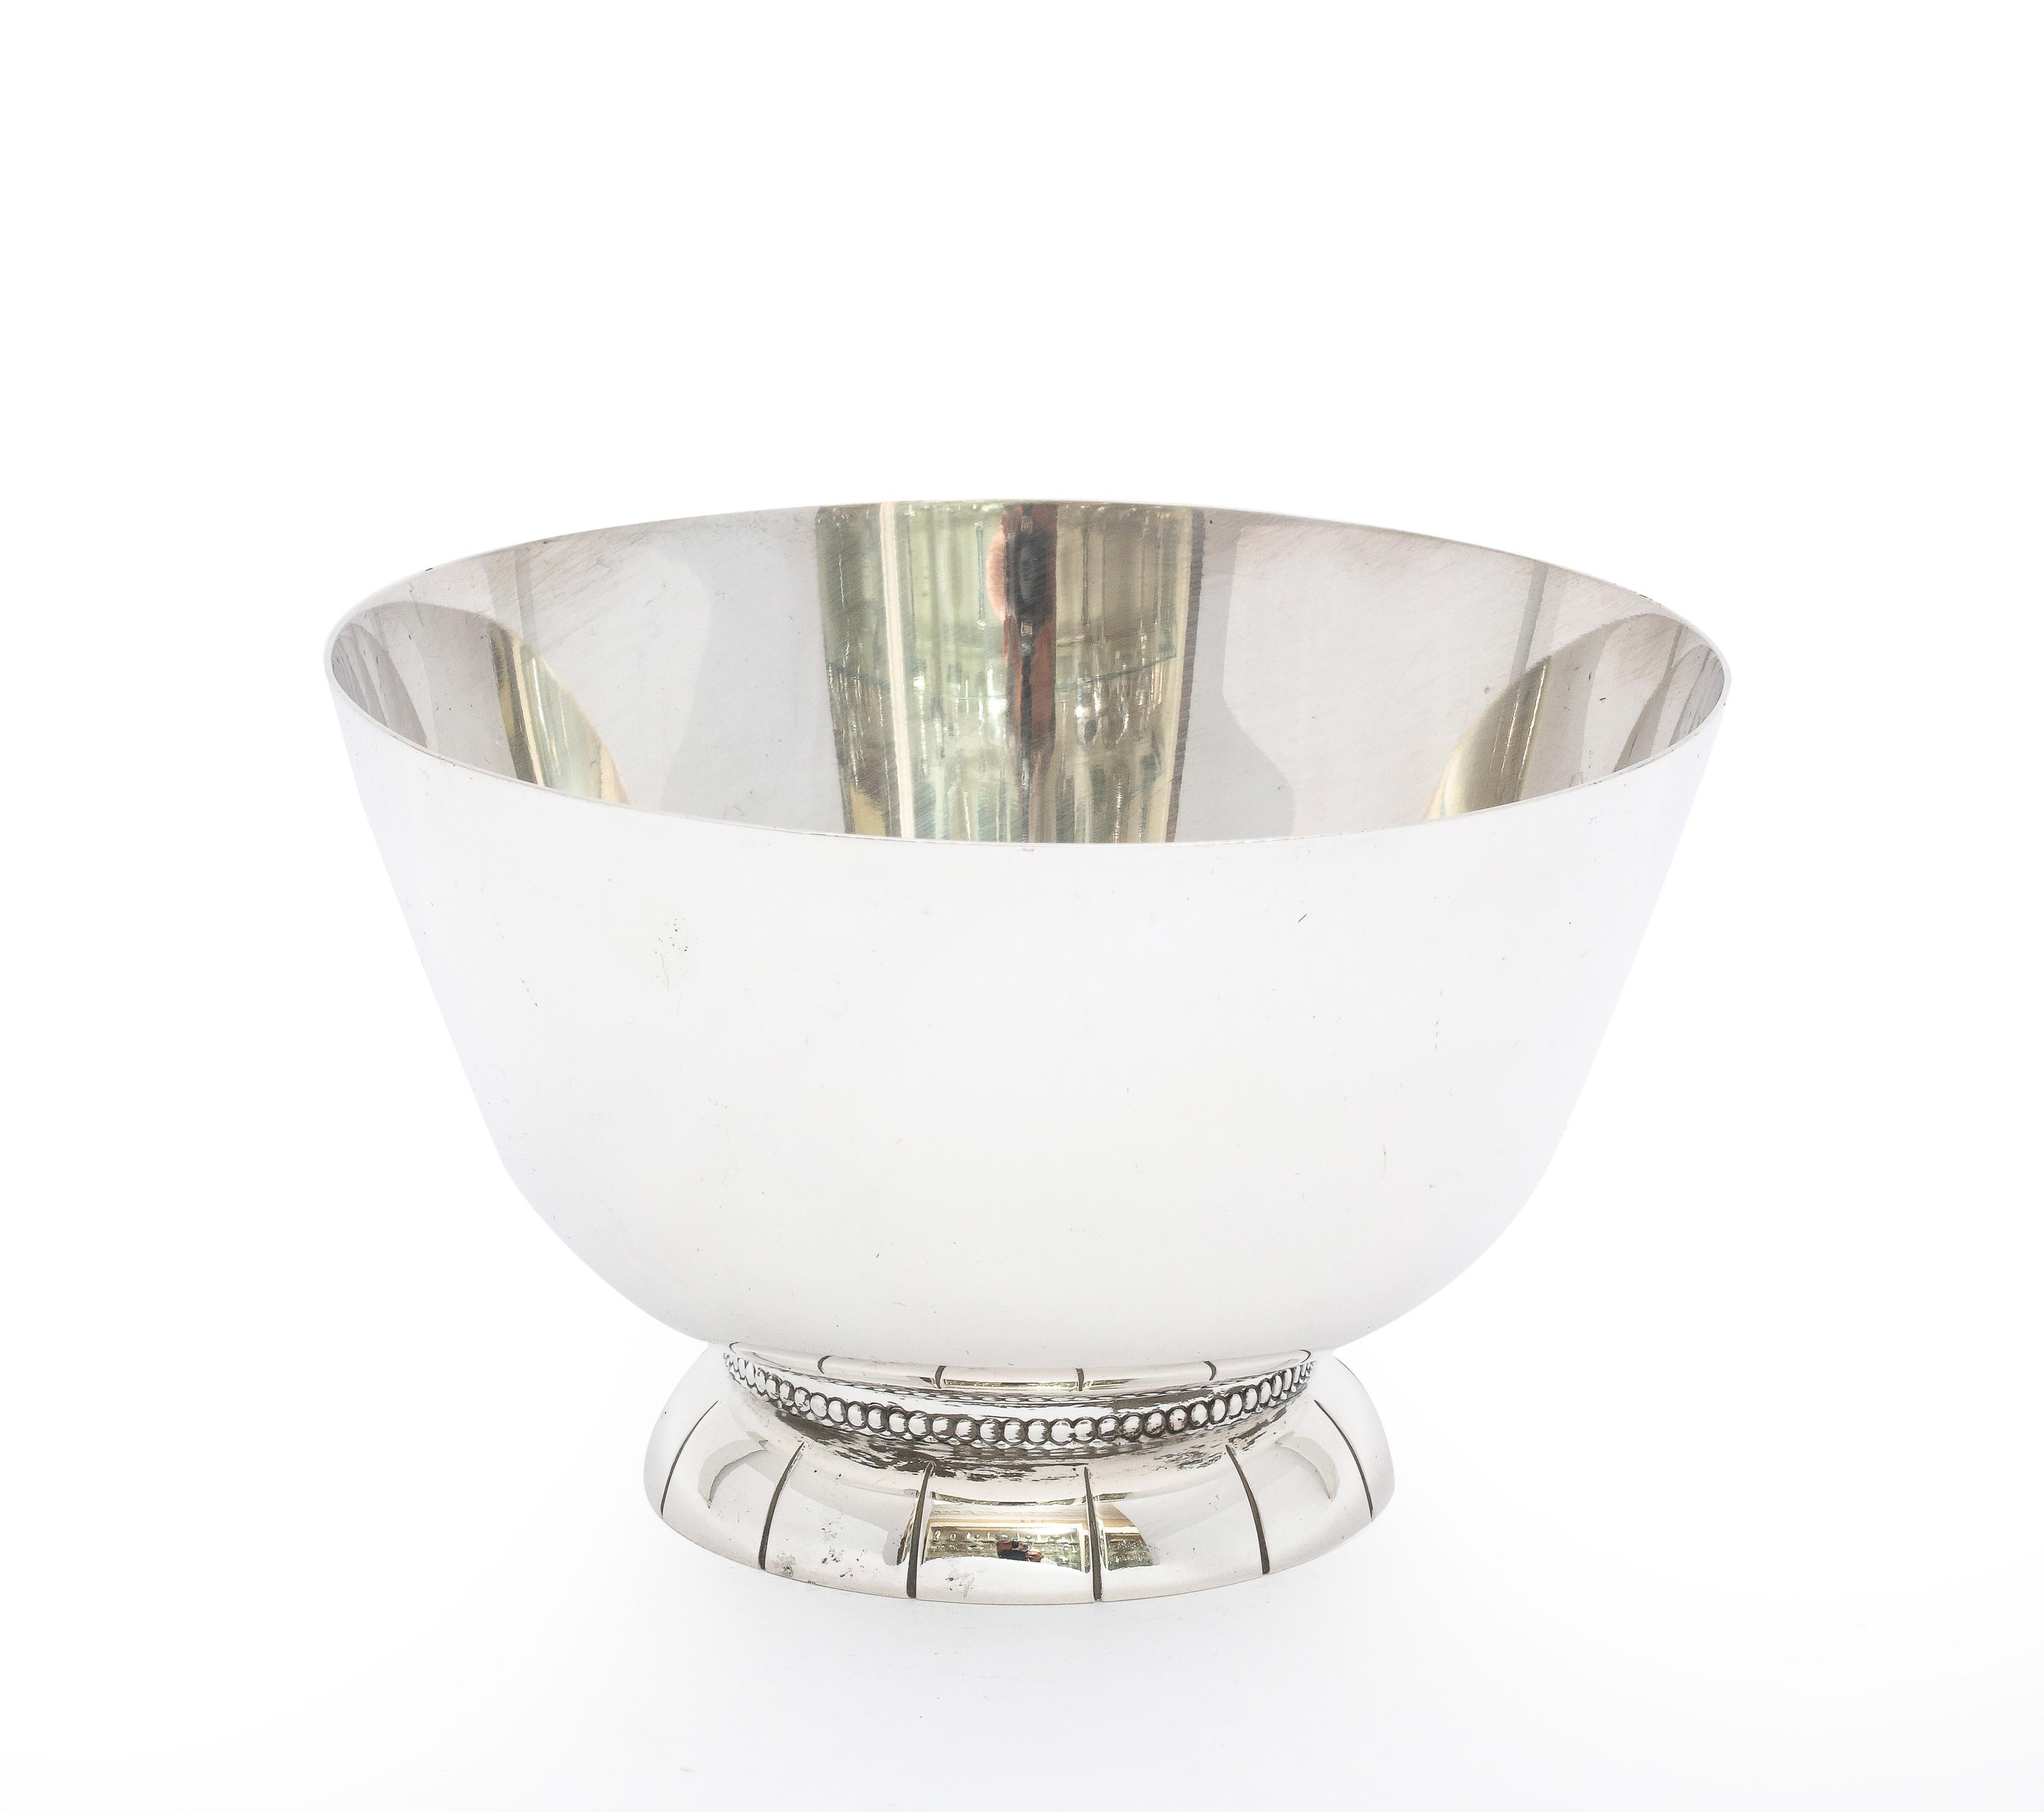 Mid-Century Modern, sterling silver serving bowl on raised base, Towle Manufacturing Co., Newburyport, Mass., Ca. 1950's. Measures 3 inches high x 5 inches diameter (at widest point); weighs 7.580 troy ounces. Dark areas in photos are reflections.